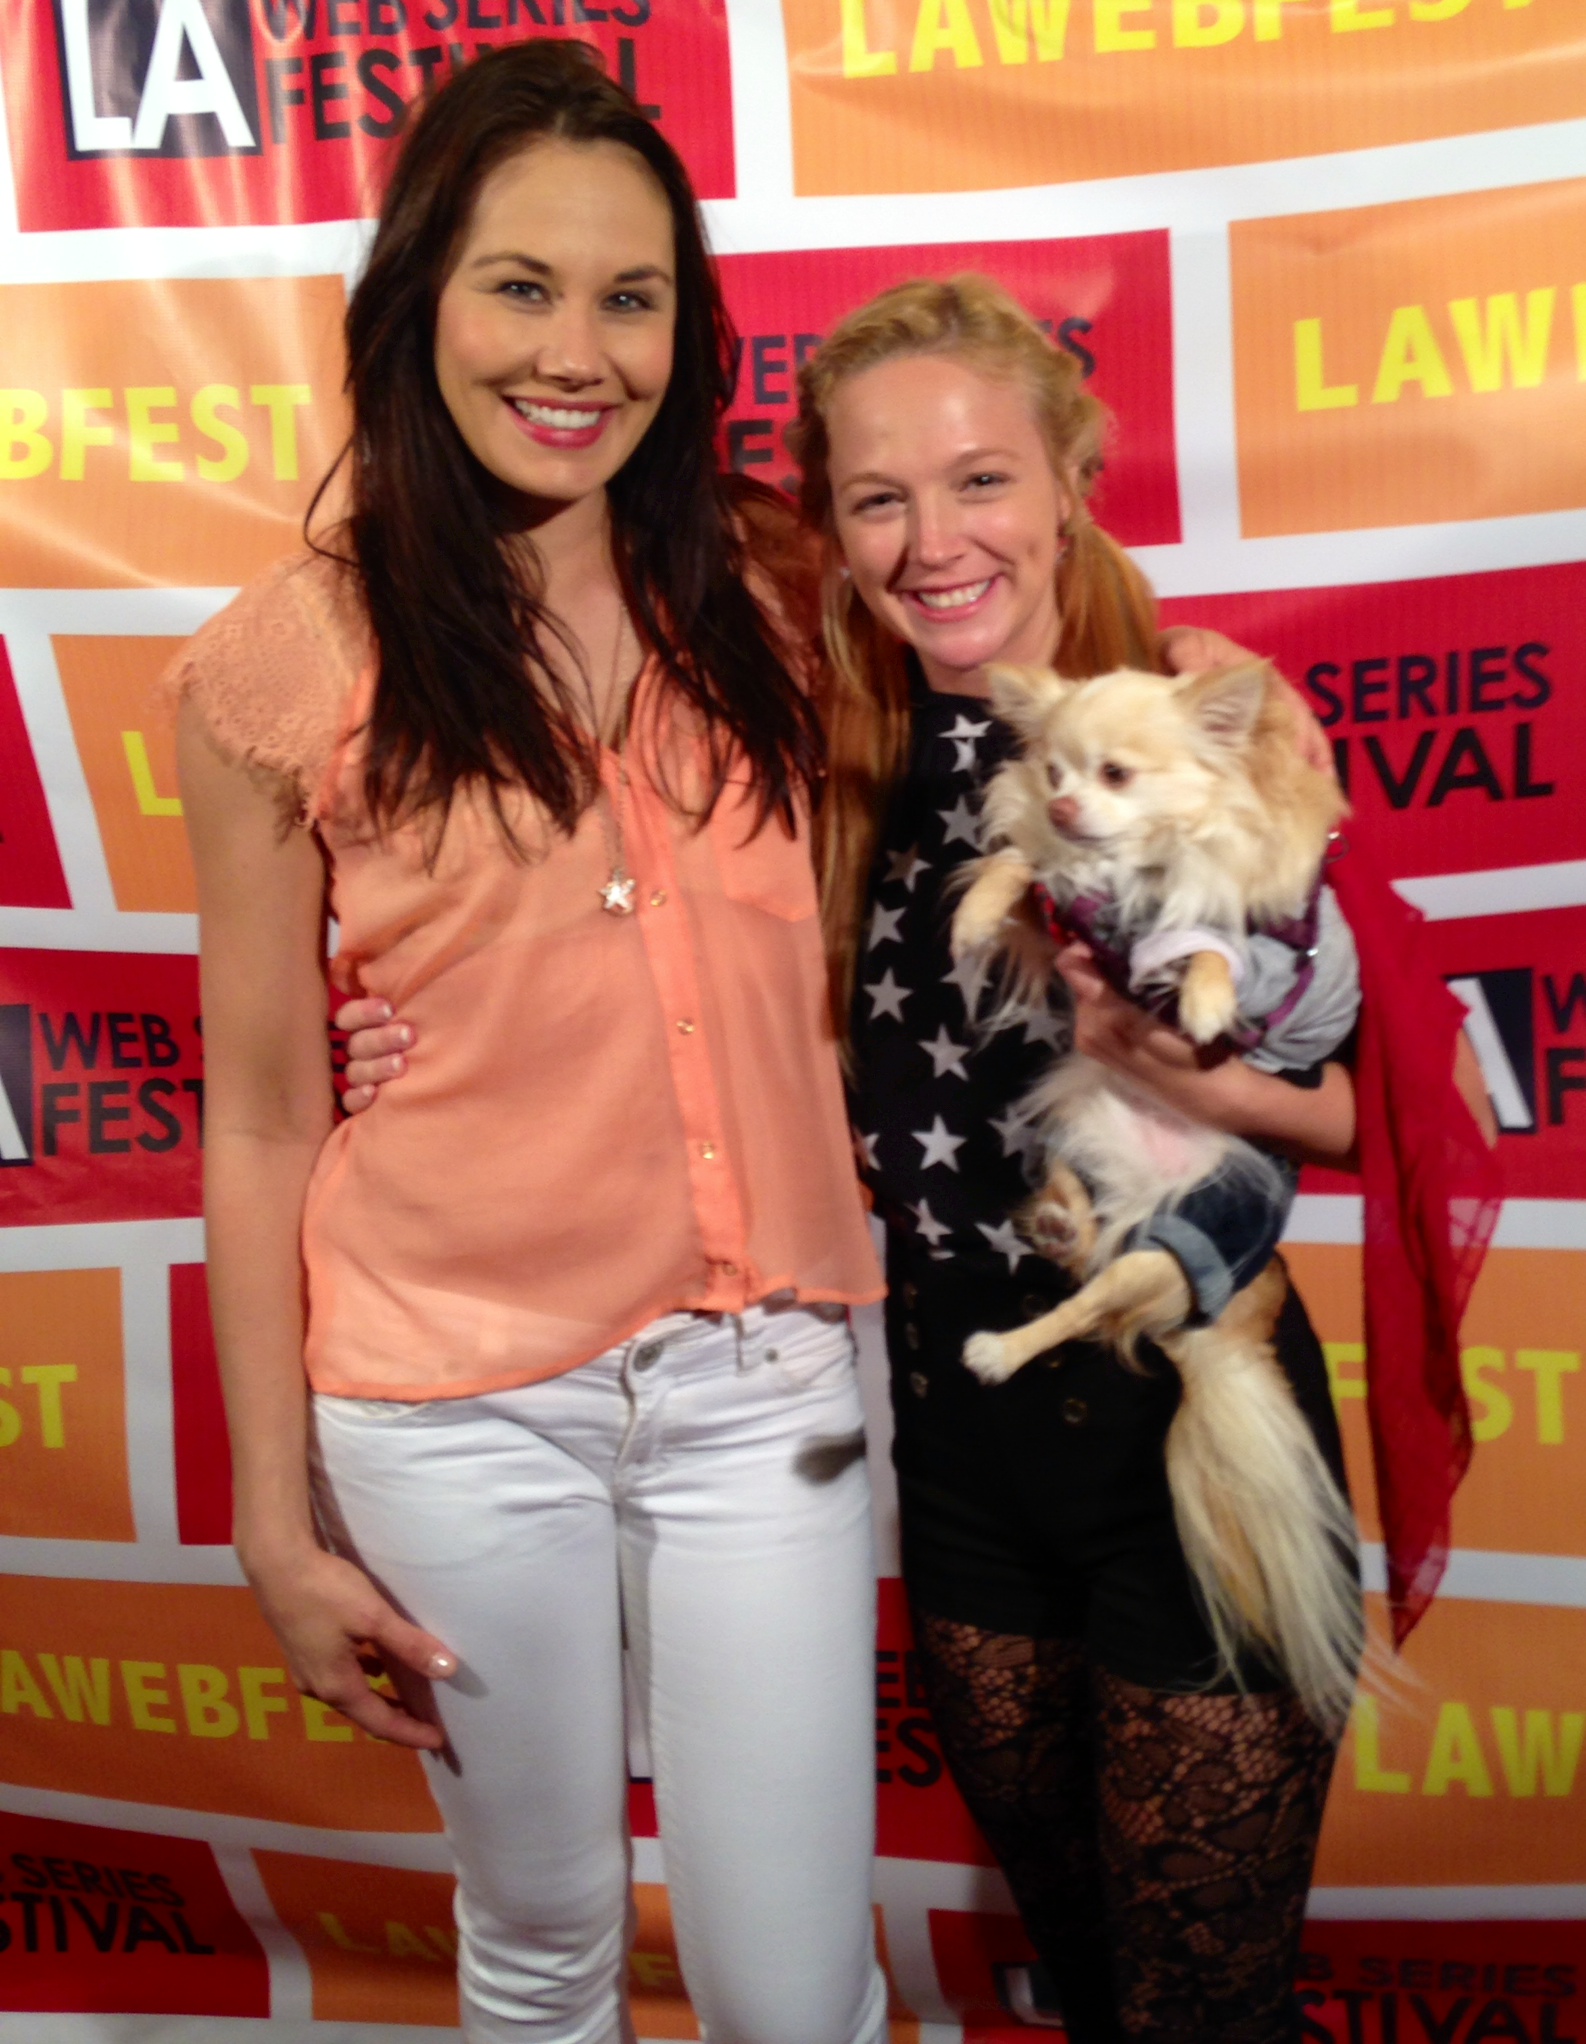 LA Web series festival for 2fur1. With Jahnna Lee Randall and Gizmo the chihuahua.